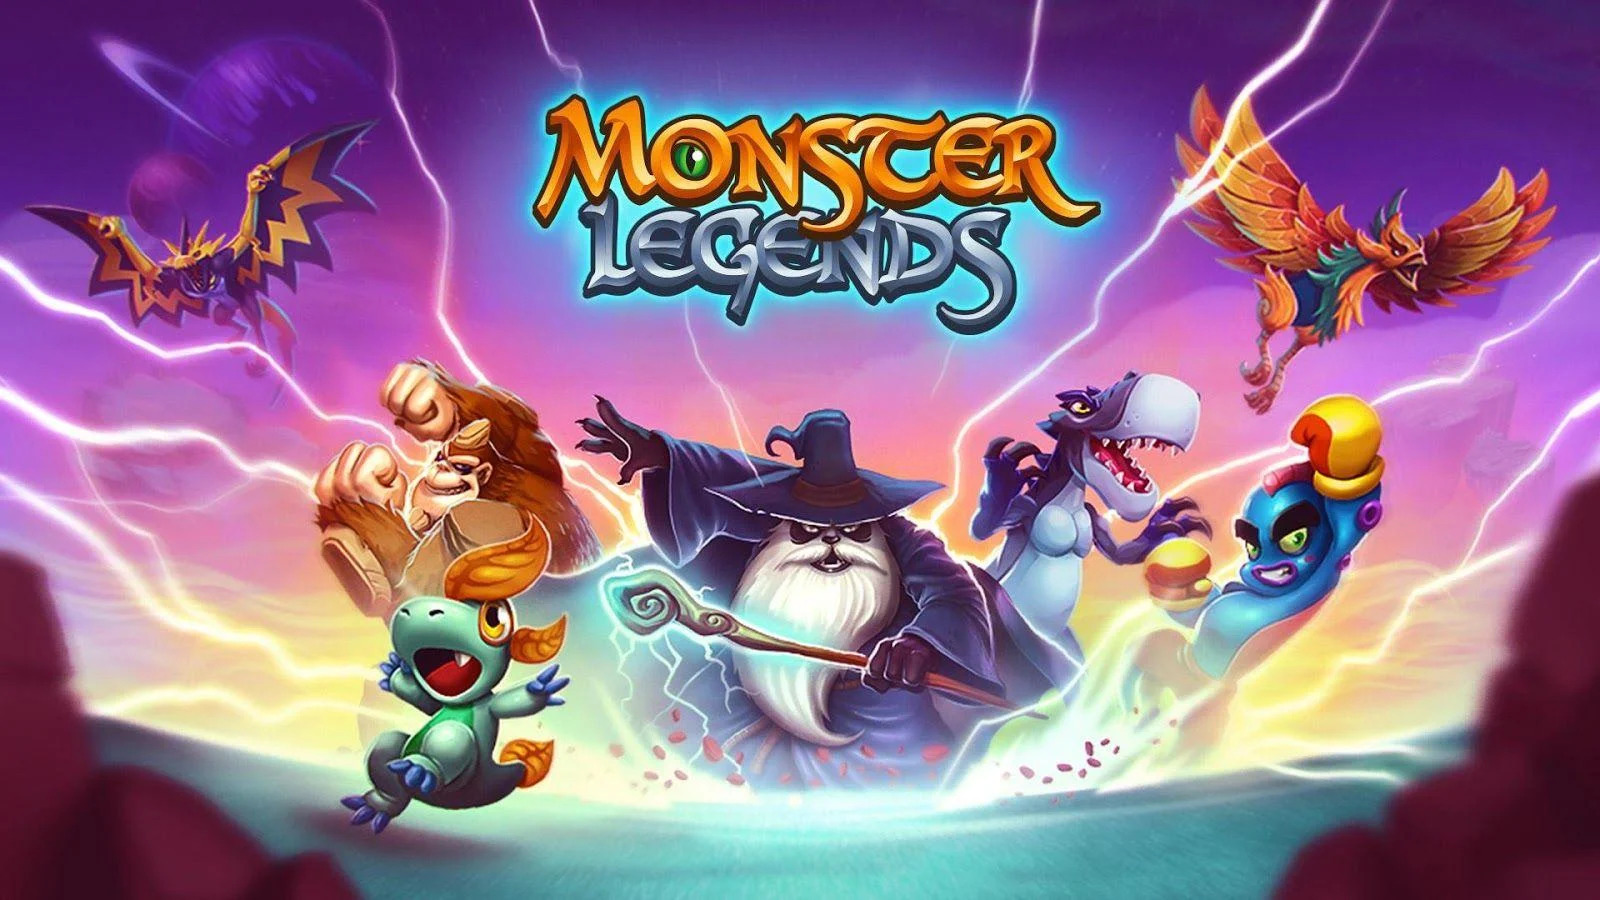 How To Play Monster Legends